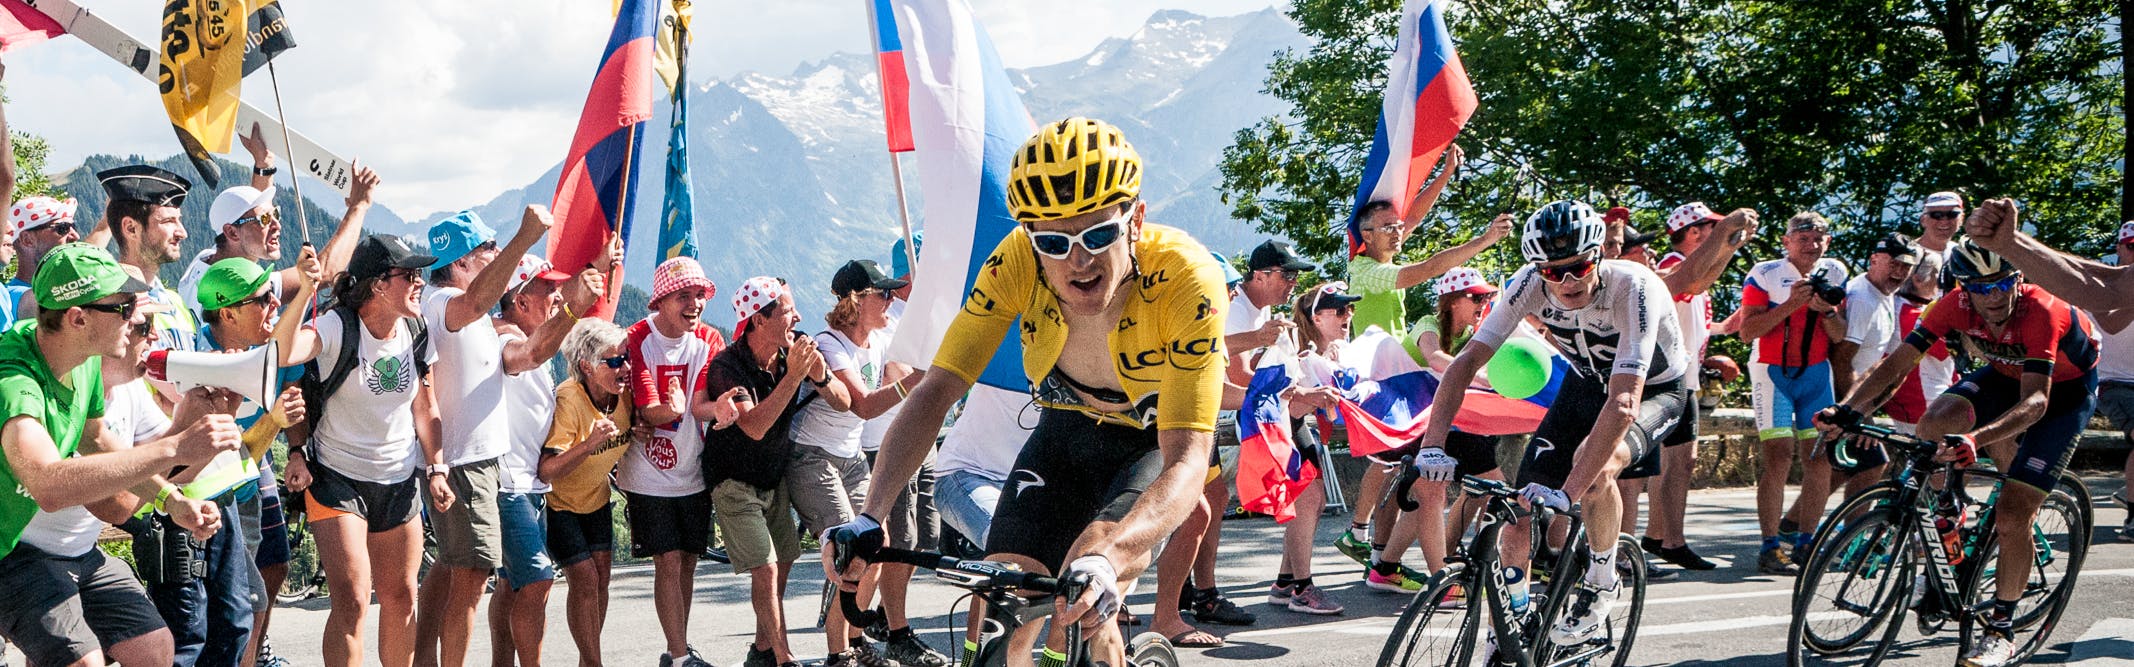 Geraint Thomas wears the Yellow Jersey while riding in the 2018 Tour de France.